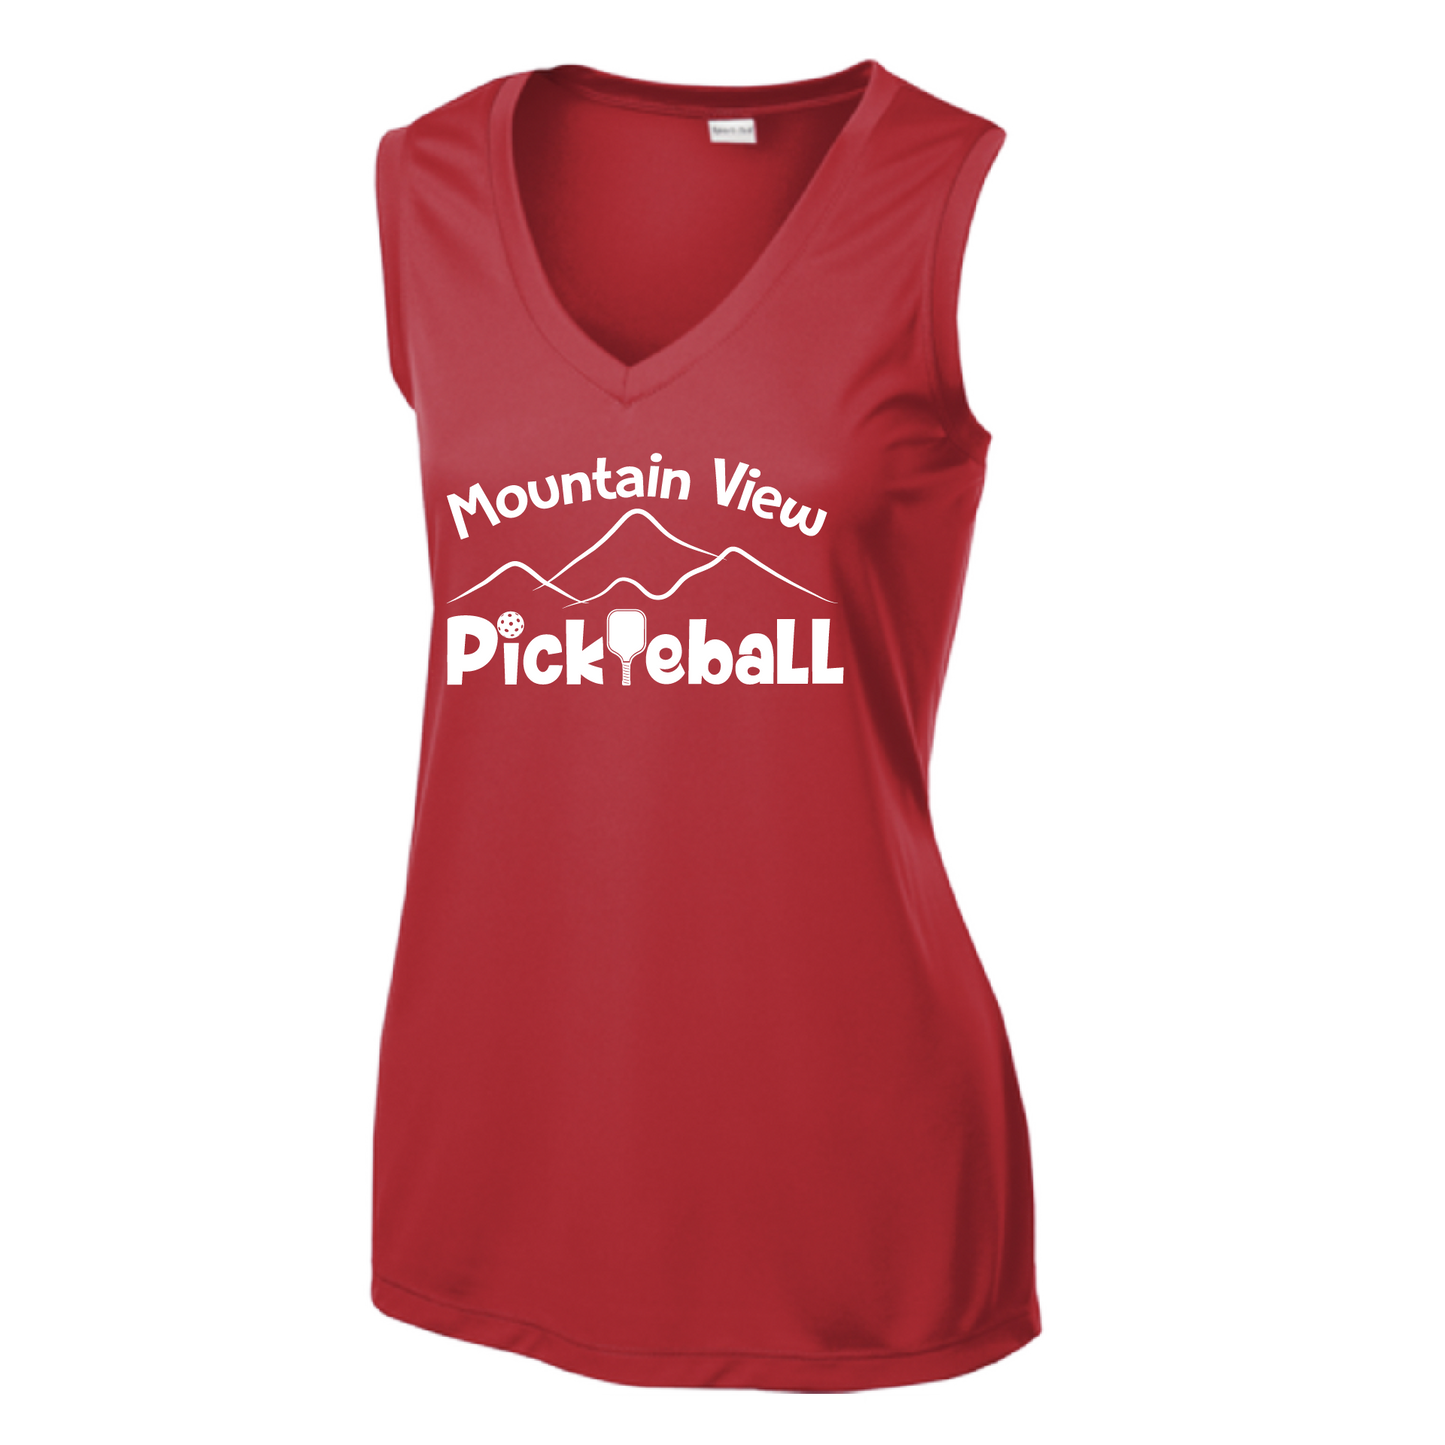 Pickleball Design: Mountain View Pickleball Club  Women's Style: Sleeveless Tank  Turn up the volume in this Women's shirt with its perfect mix of softness and attitude. Material is ultra-comfortable with moisture wicking properties and tri-blend softness. PosiCharge technology locks in color. Highly breathable and lightweight.